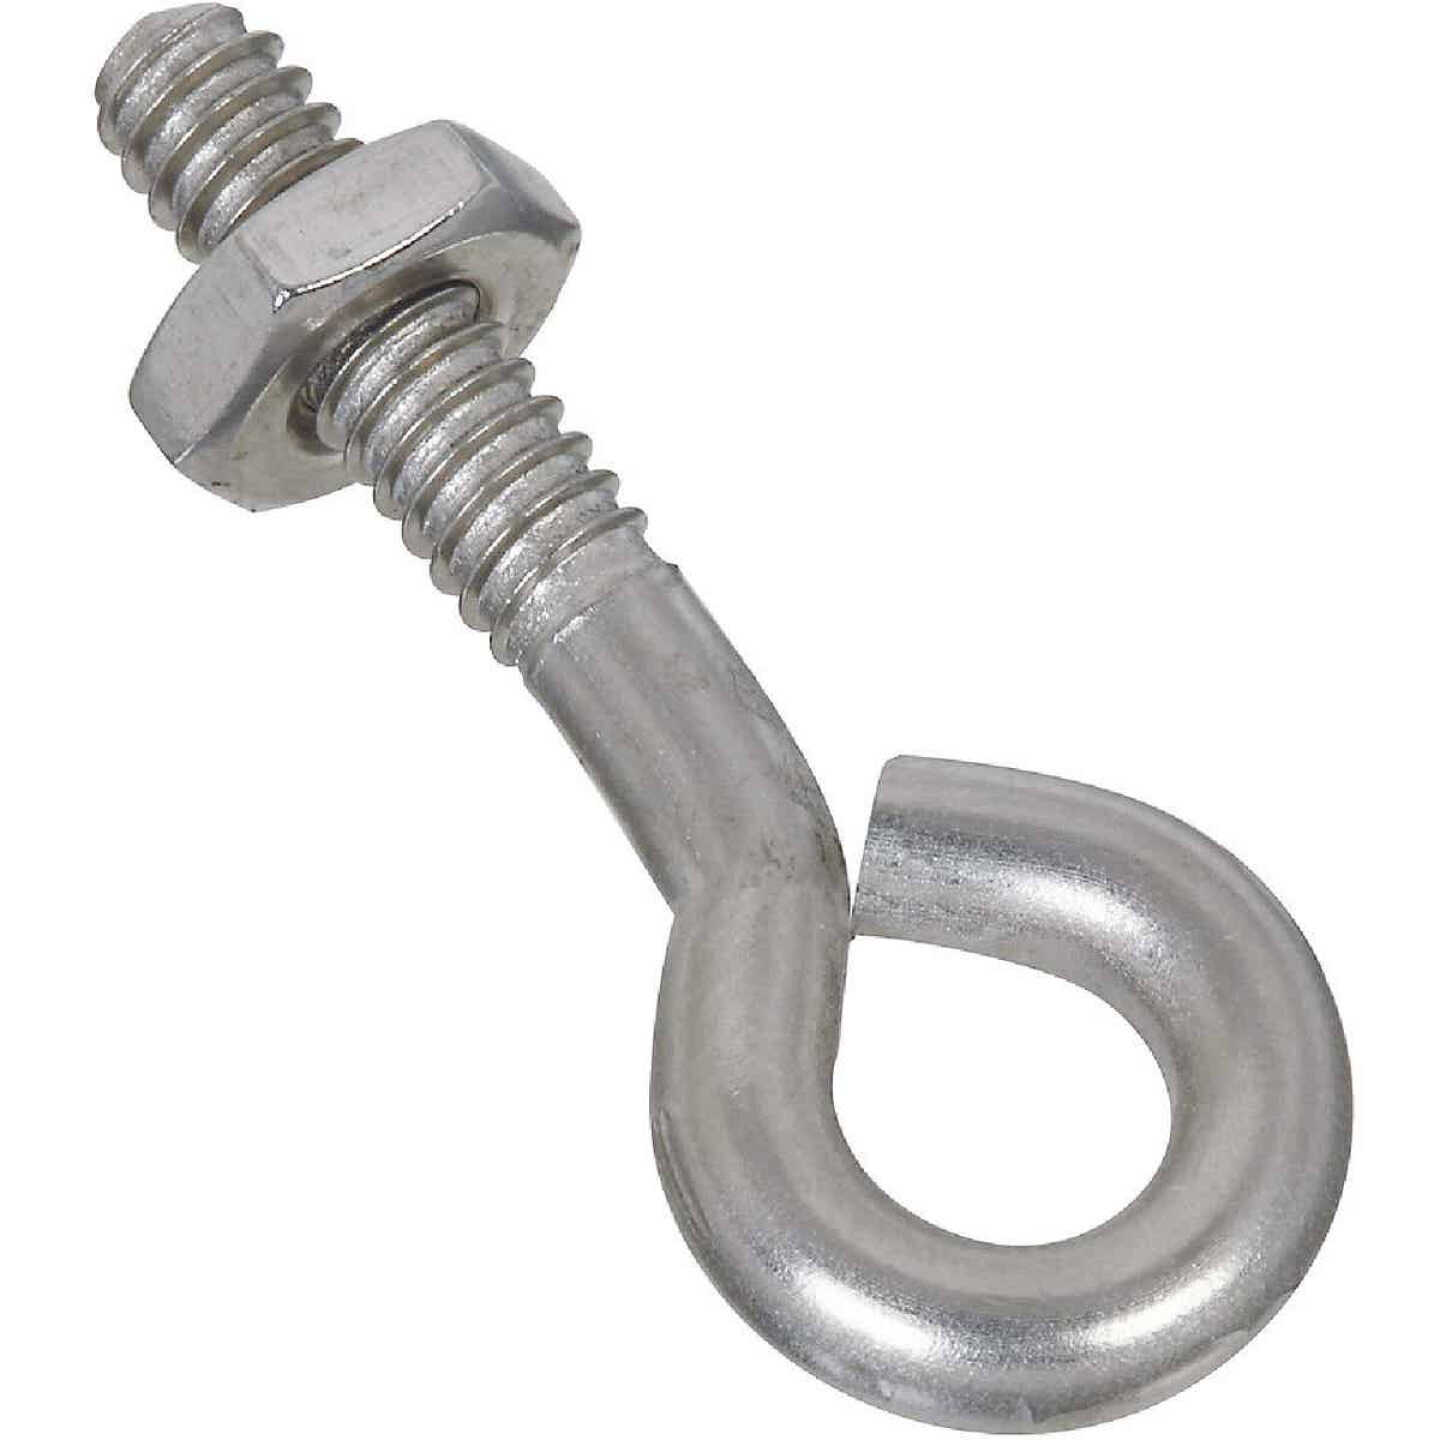 National 3/16 In. x 1-1/2 In. Stainless Steel Eye Bolt Image 1